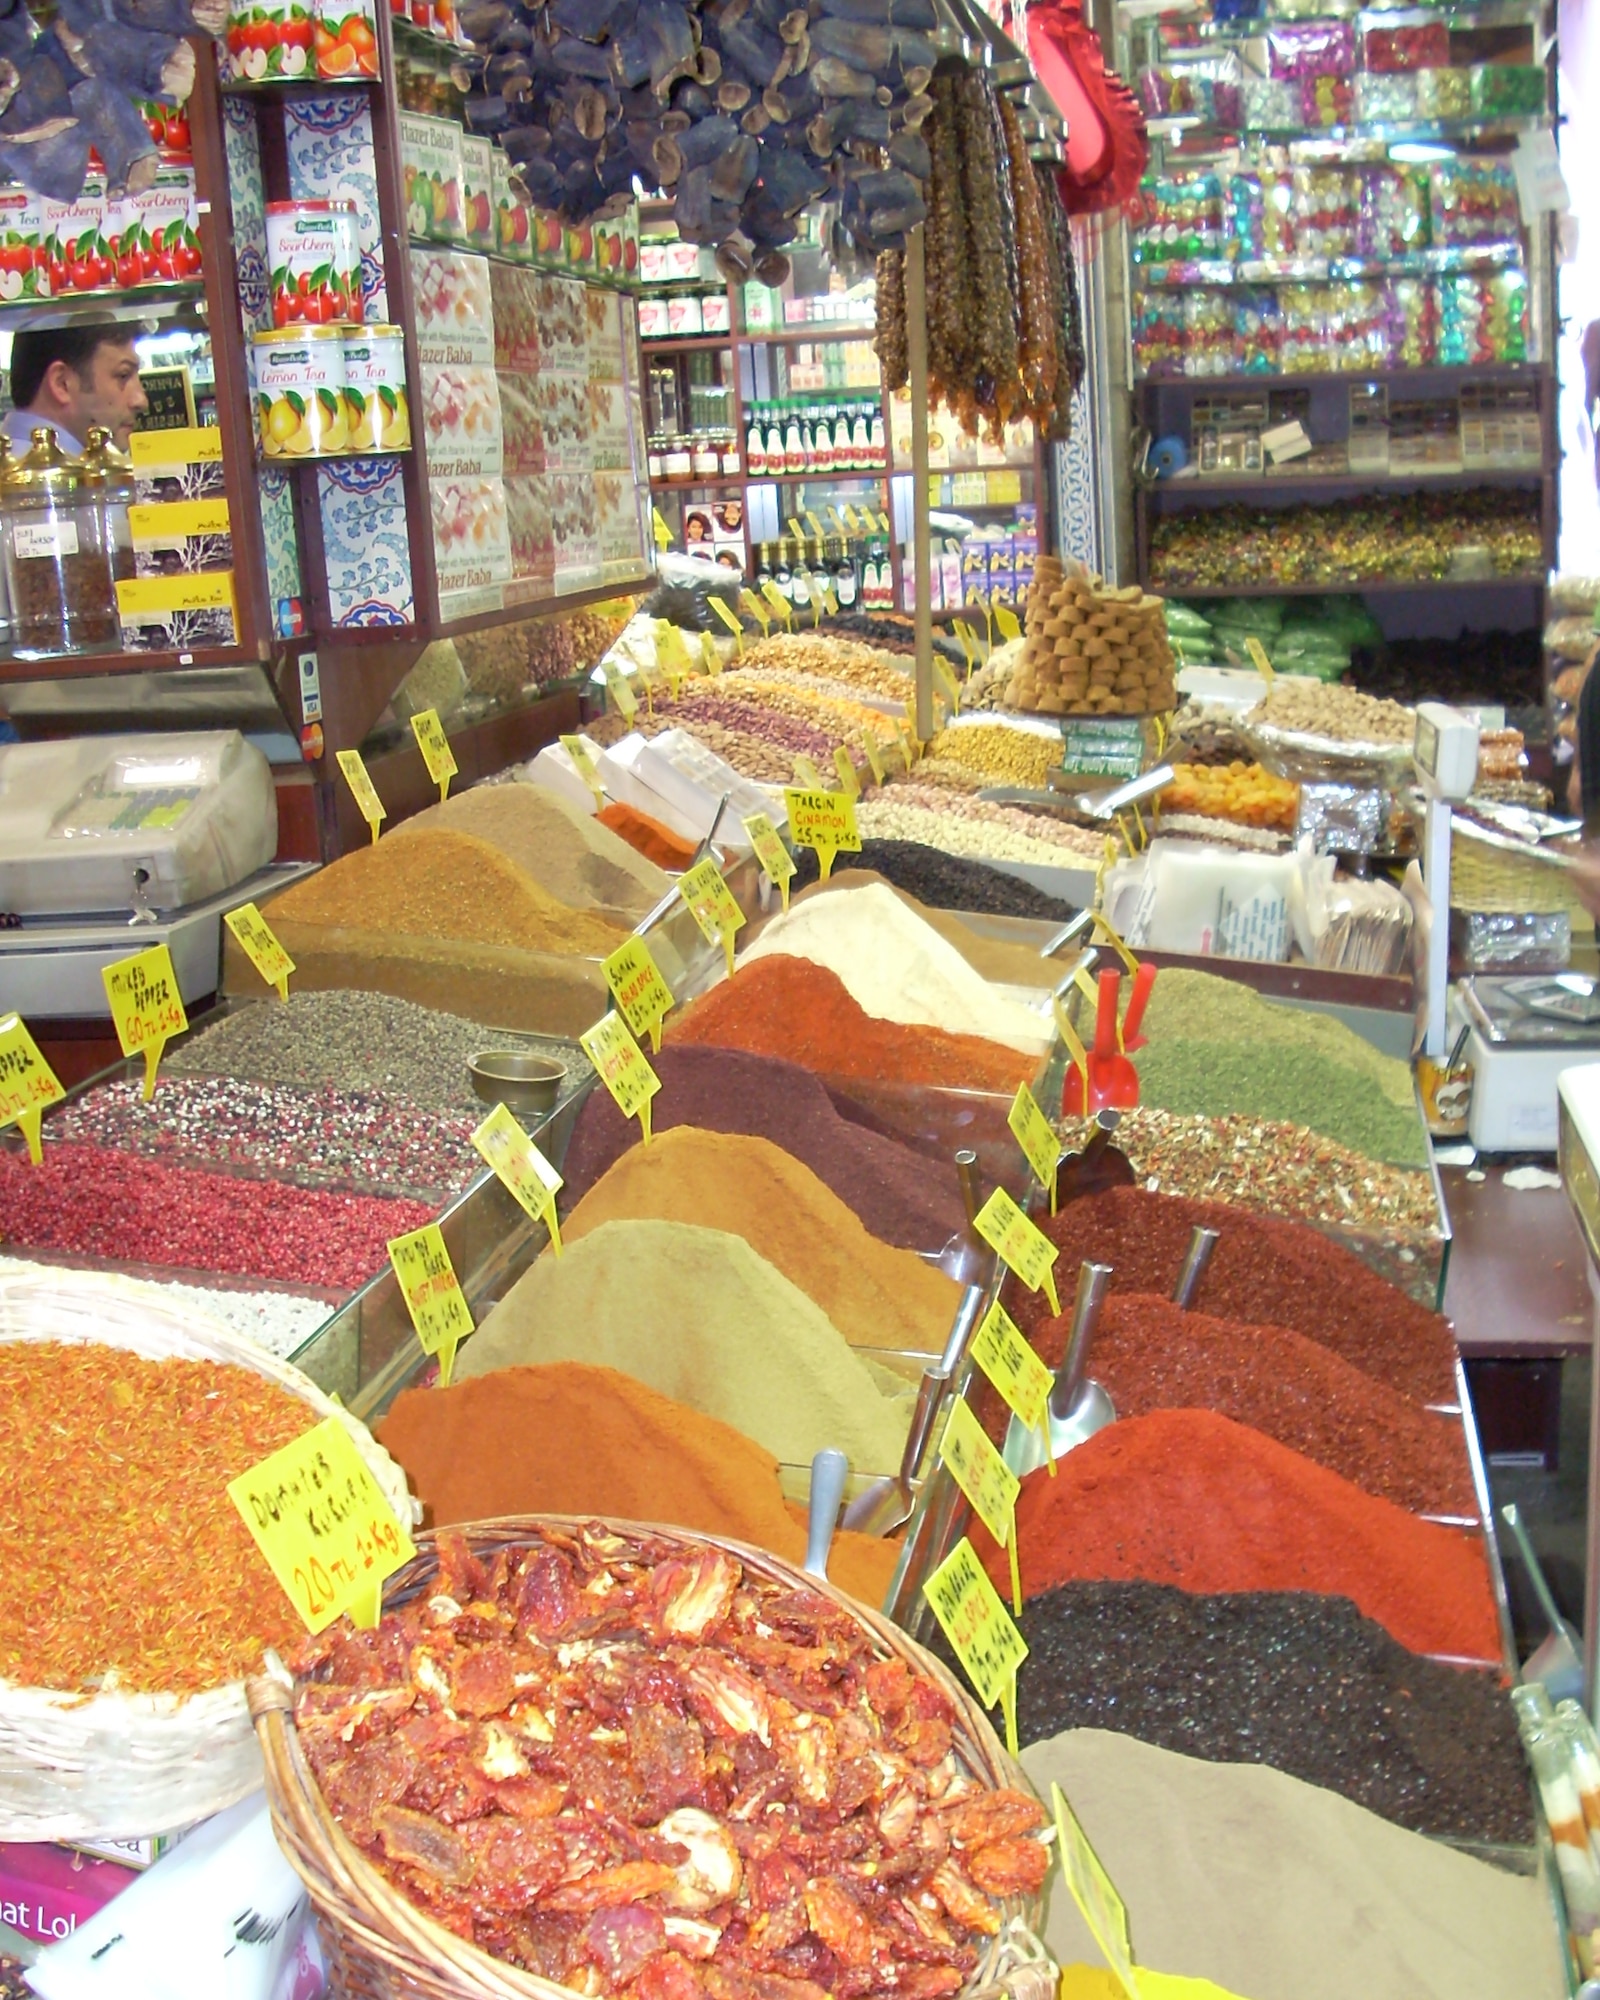 Numerous spices line a shop at the Spice Bazaar in Istanbul Turkey.  The bazaar has sold spices, figs, honey and other exotics since the 1660s. (U.S. Air Force photo/Staff Sgt. Lauren Padden)
